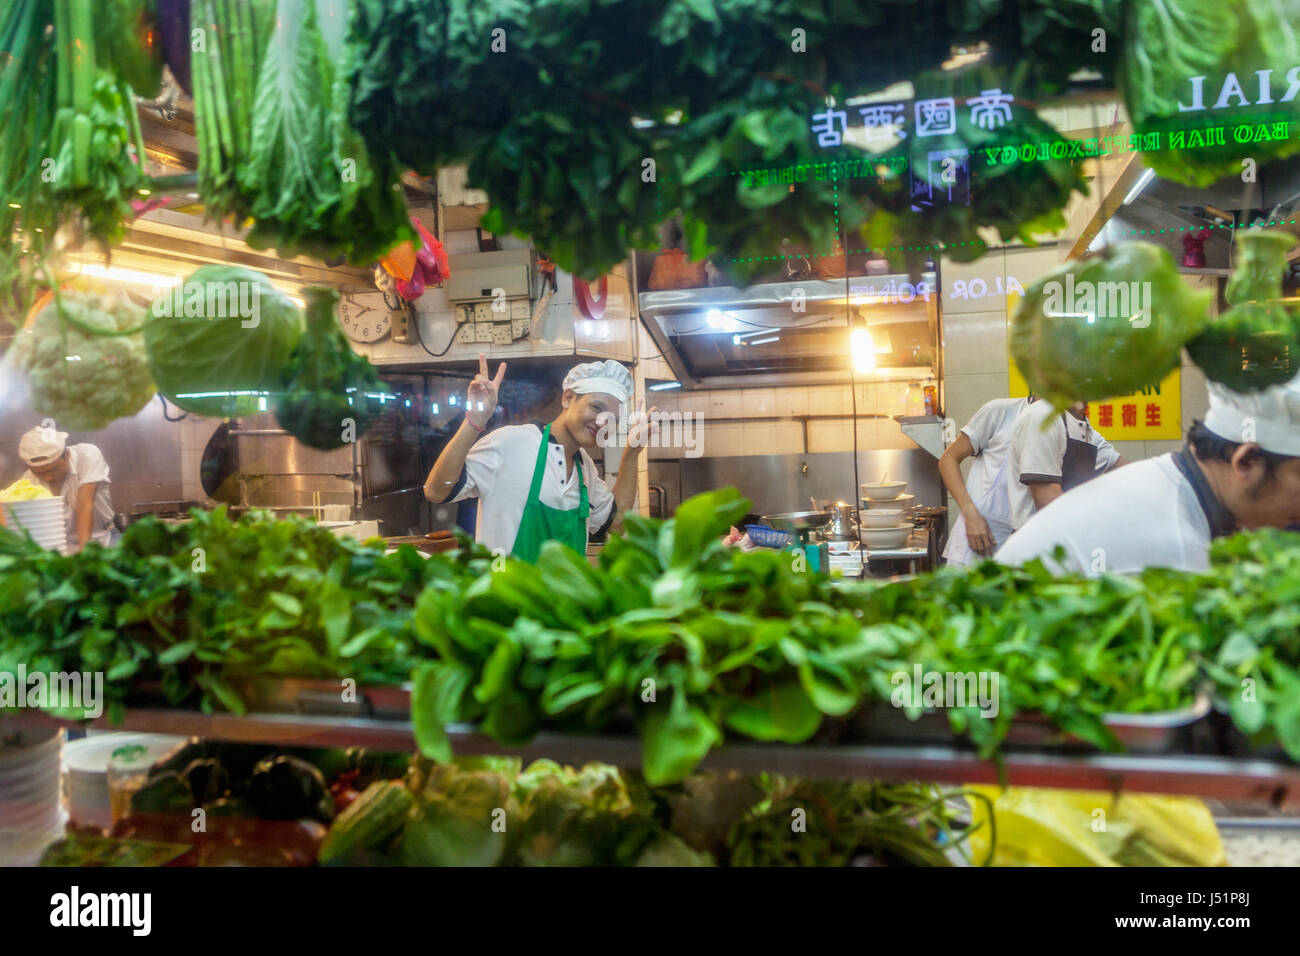 V-sign is given by a Malay restaurant chef through the window lined with green vegetables in Bukit Bintang, Kuala Lumpur, Malaysia. Stock Photo